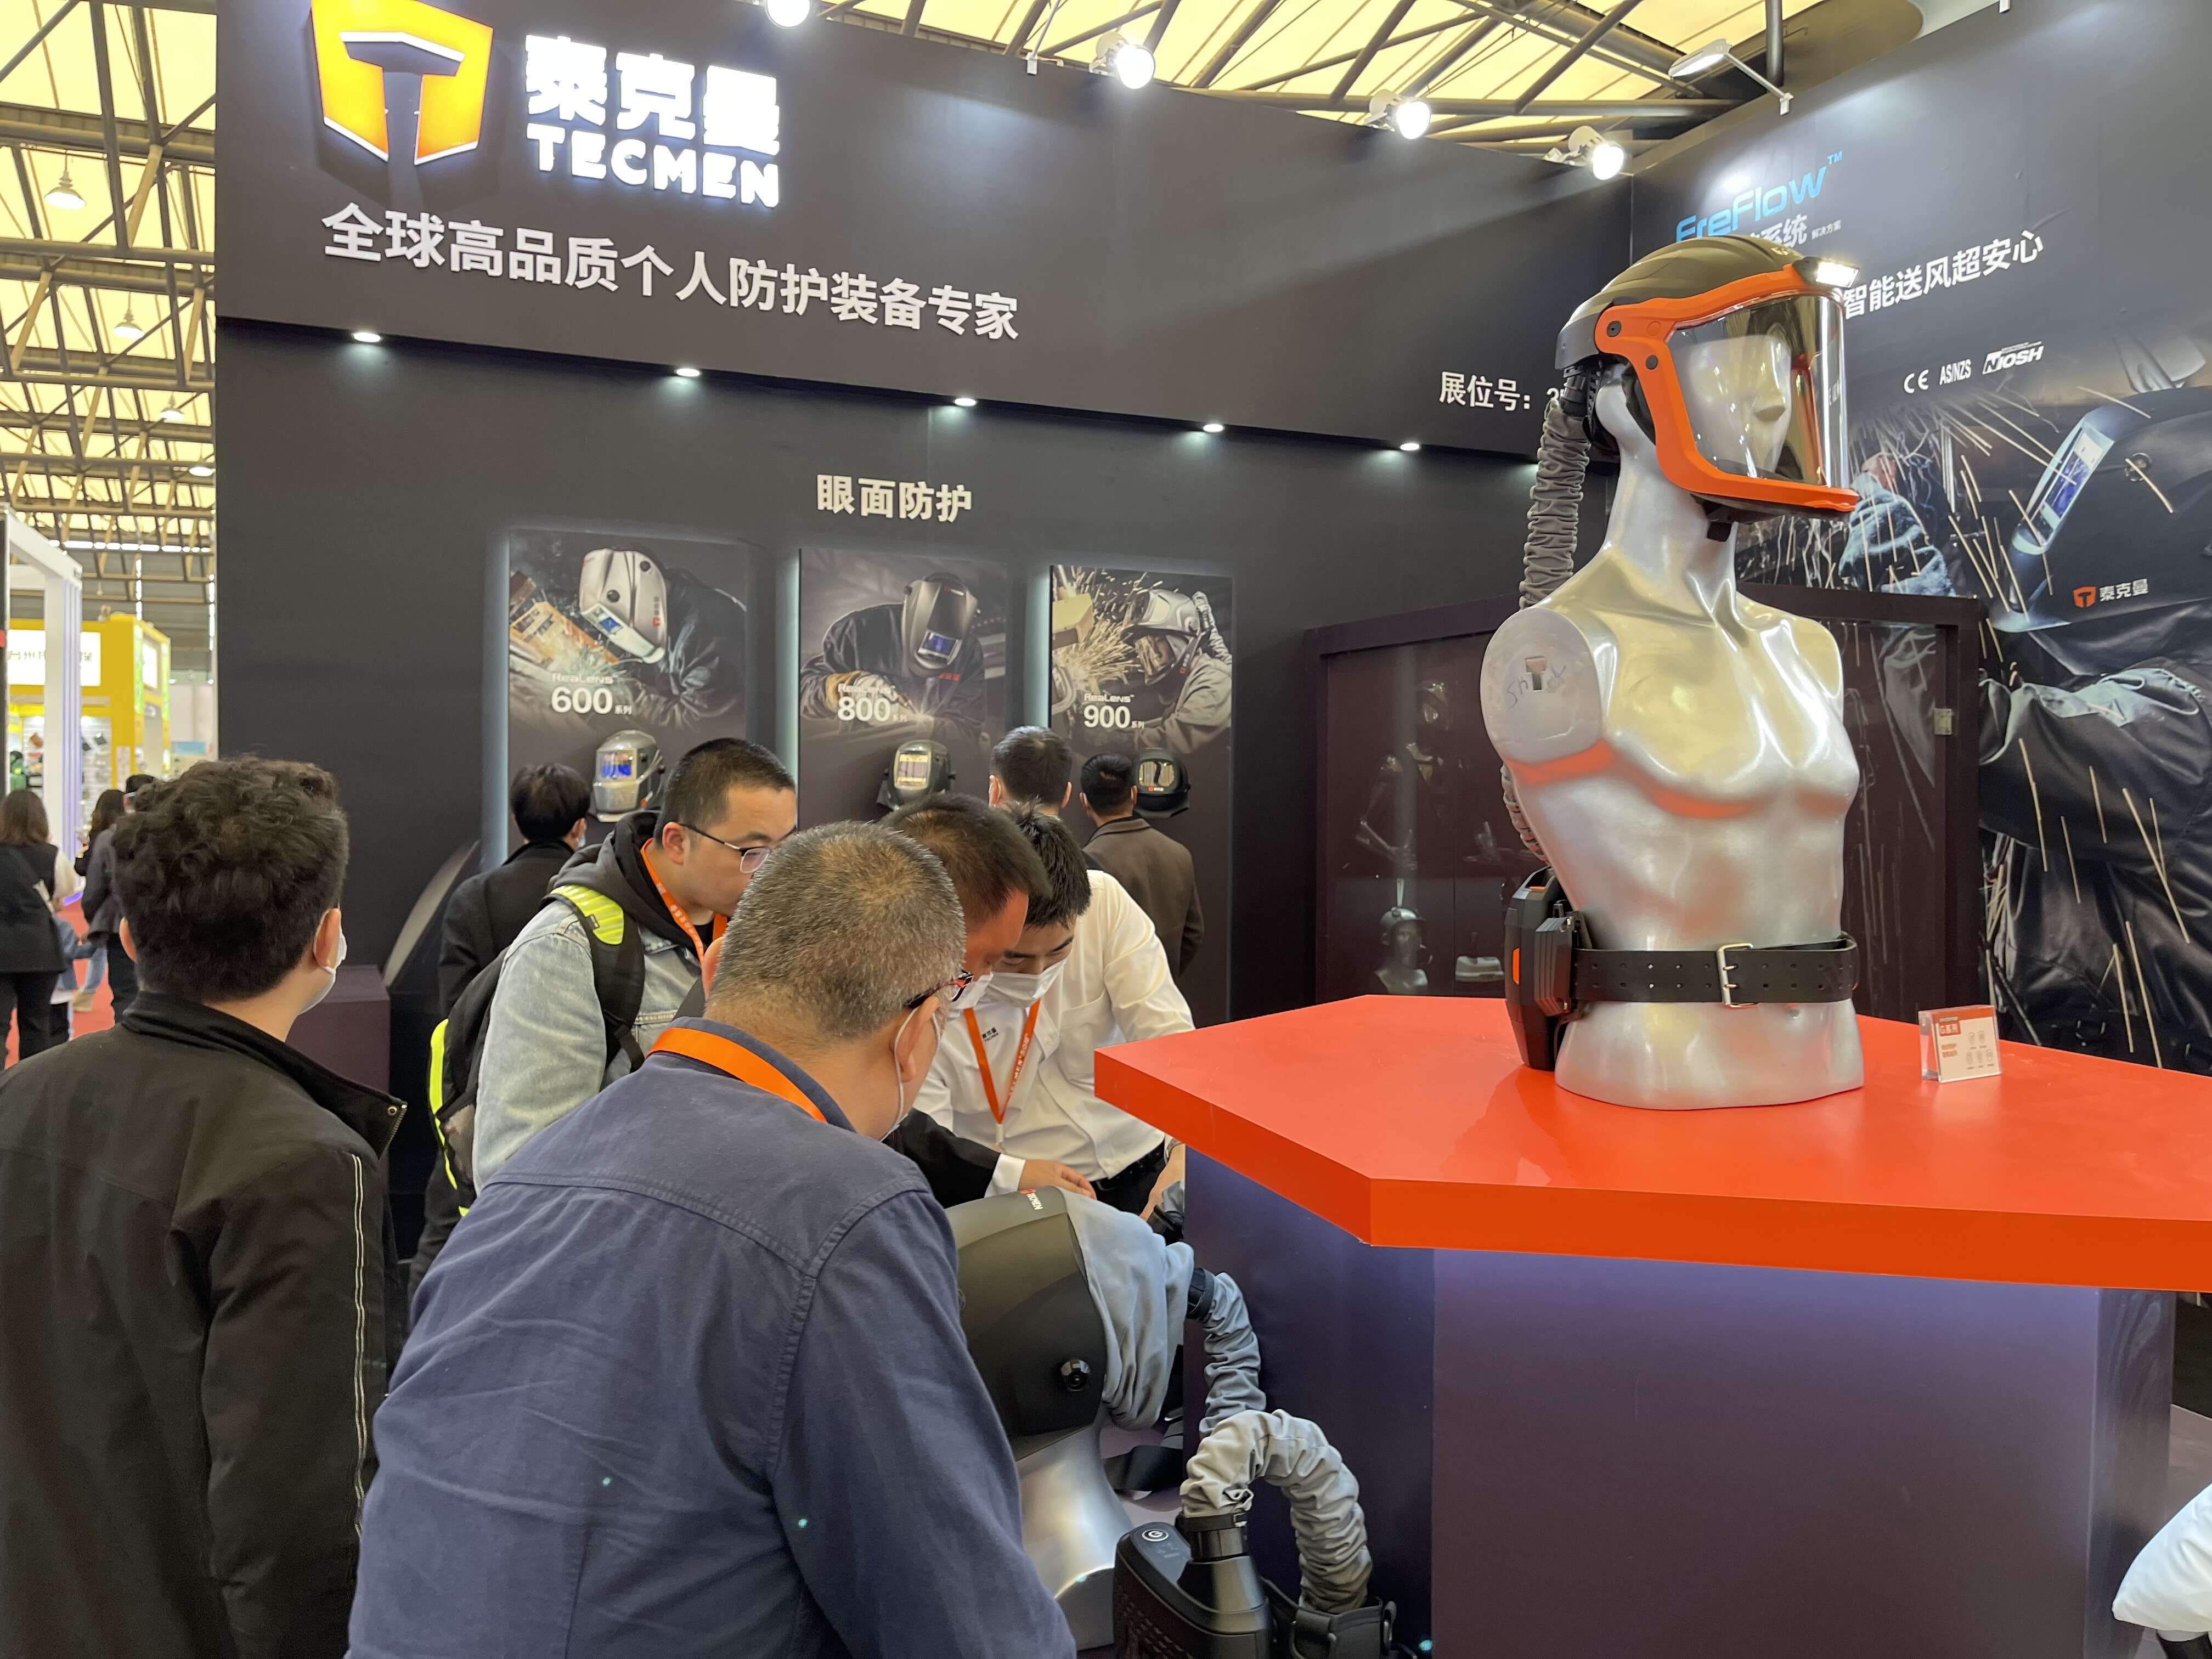 TECMEN to Showcase Innovative Personal Protective Solutions at the 2017 Beijing·Essen Welding and Cutting Exhibition